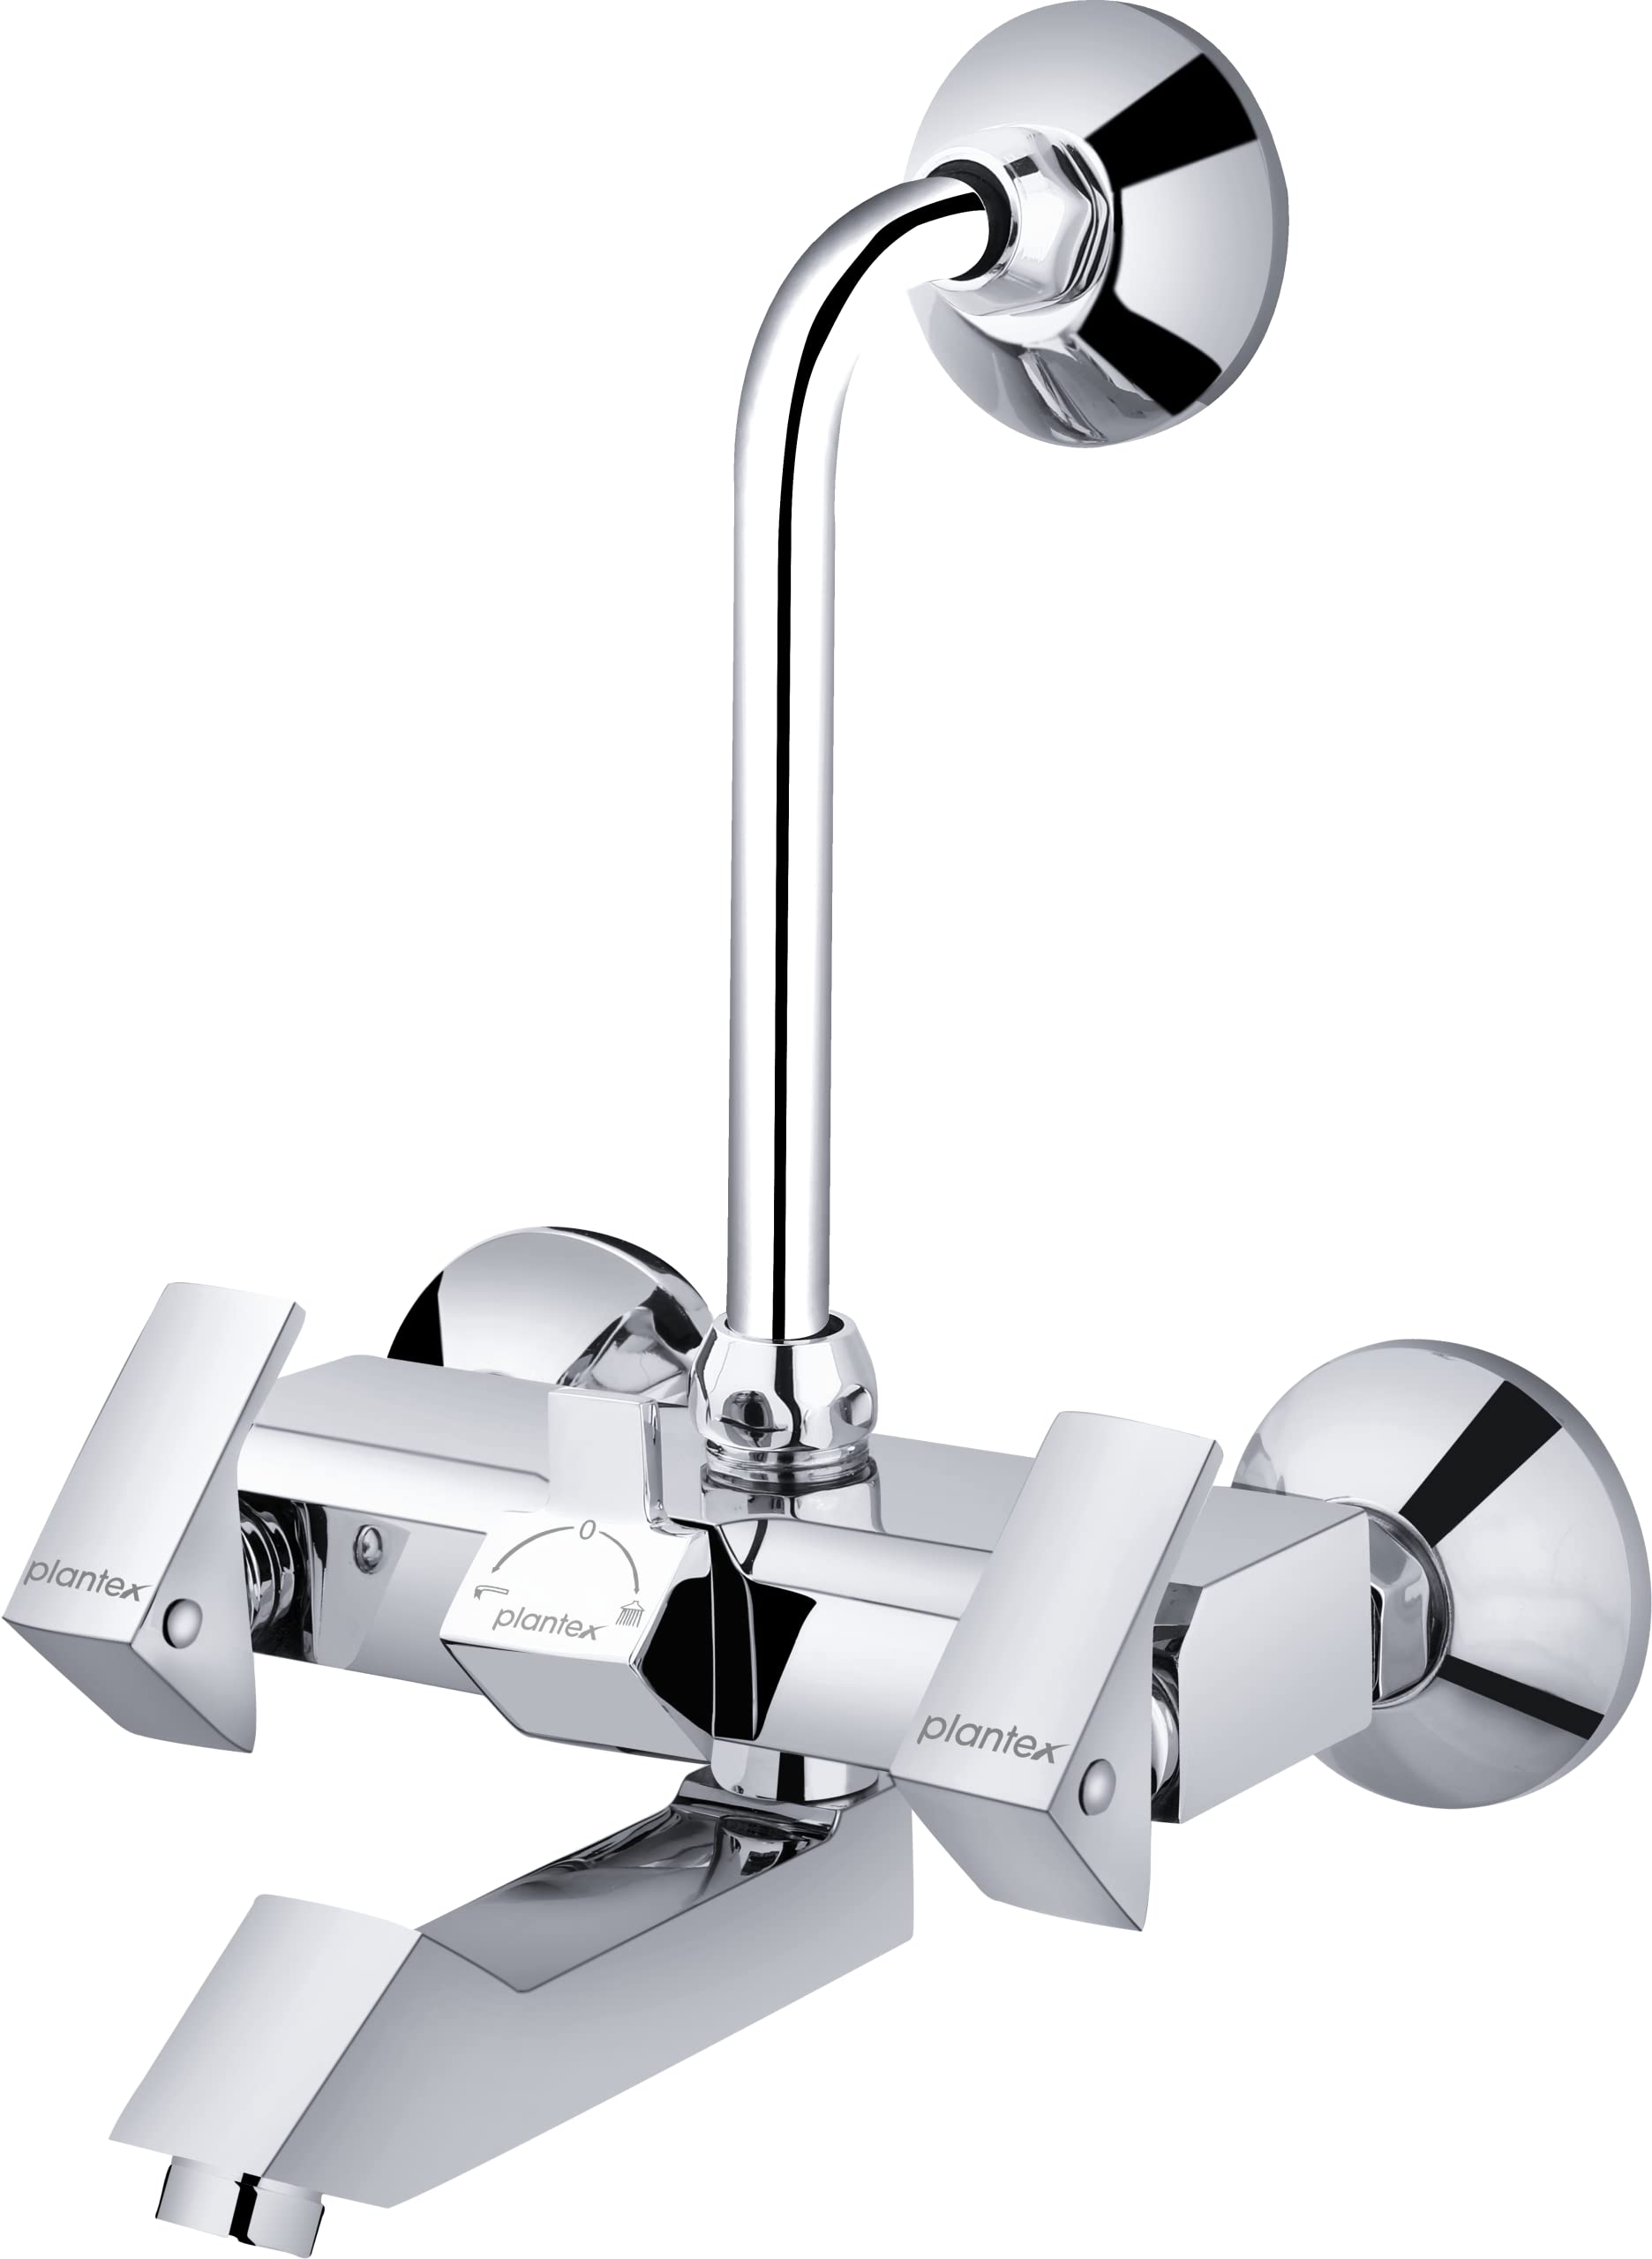 Plantex PRI-318 Pure Brass 2 in 1 Wall Mixer With Arrangement Of Overhead Shower for Bathroom/Hot & Cold Tap With Brass Wall Flange and Teflon Tape (Mirror-Chrome Finish)